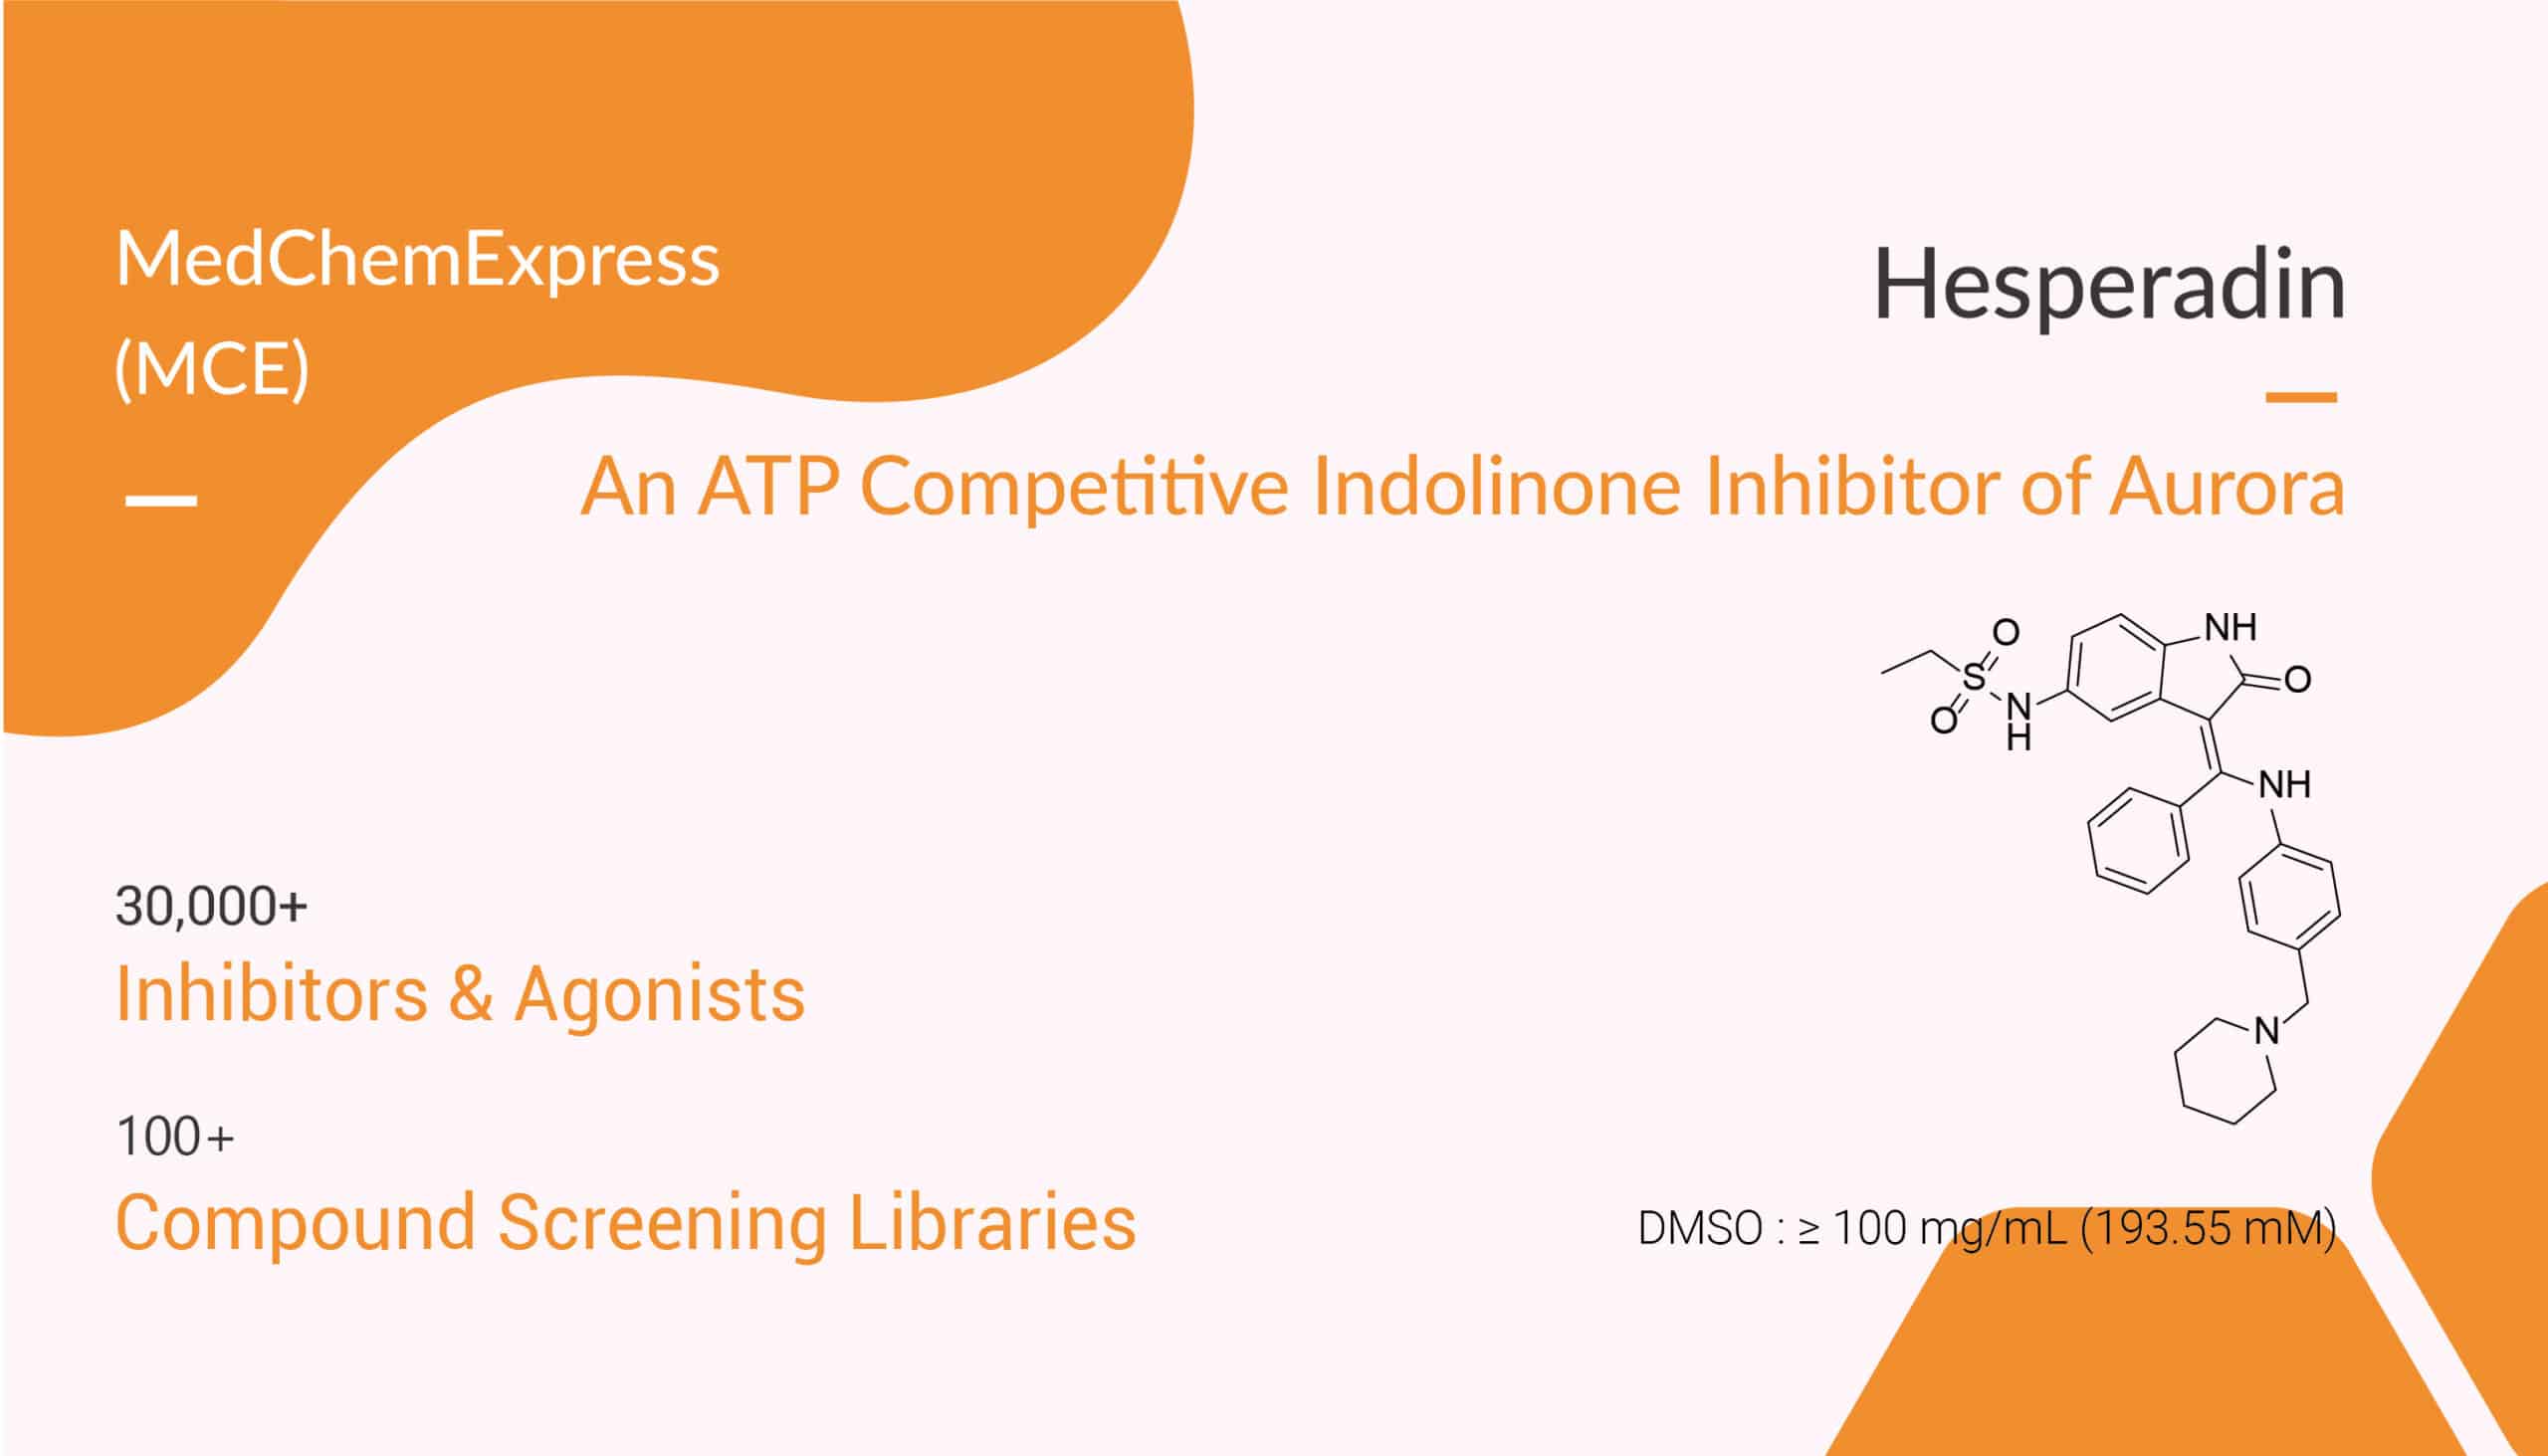 Hesperadin is an ATP Competitive Indolinone Inhibitor of Aurora A and B